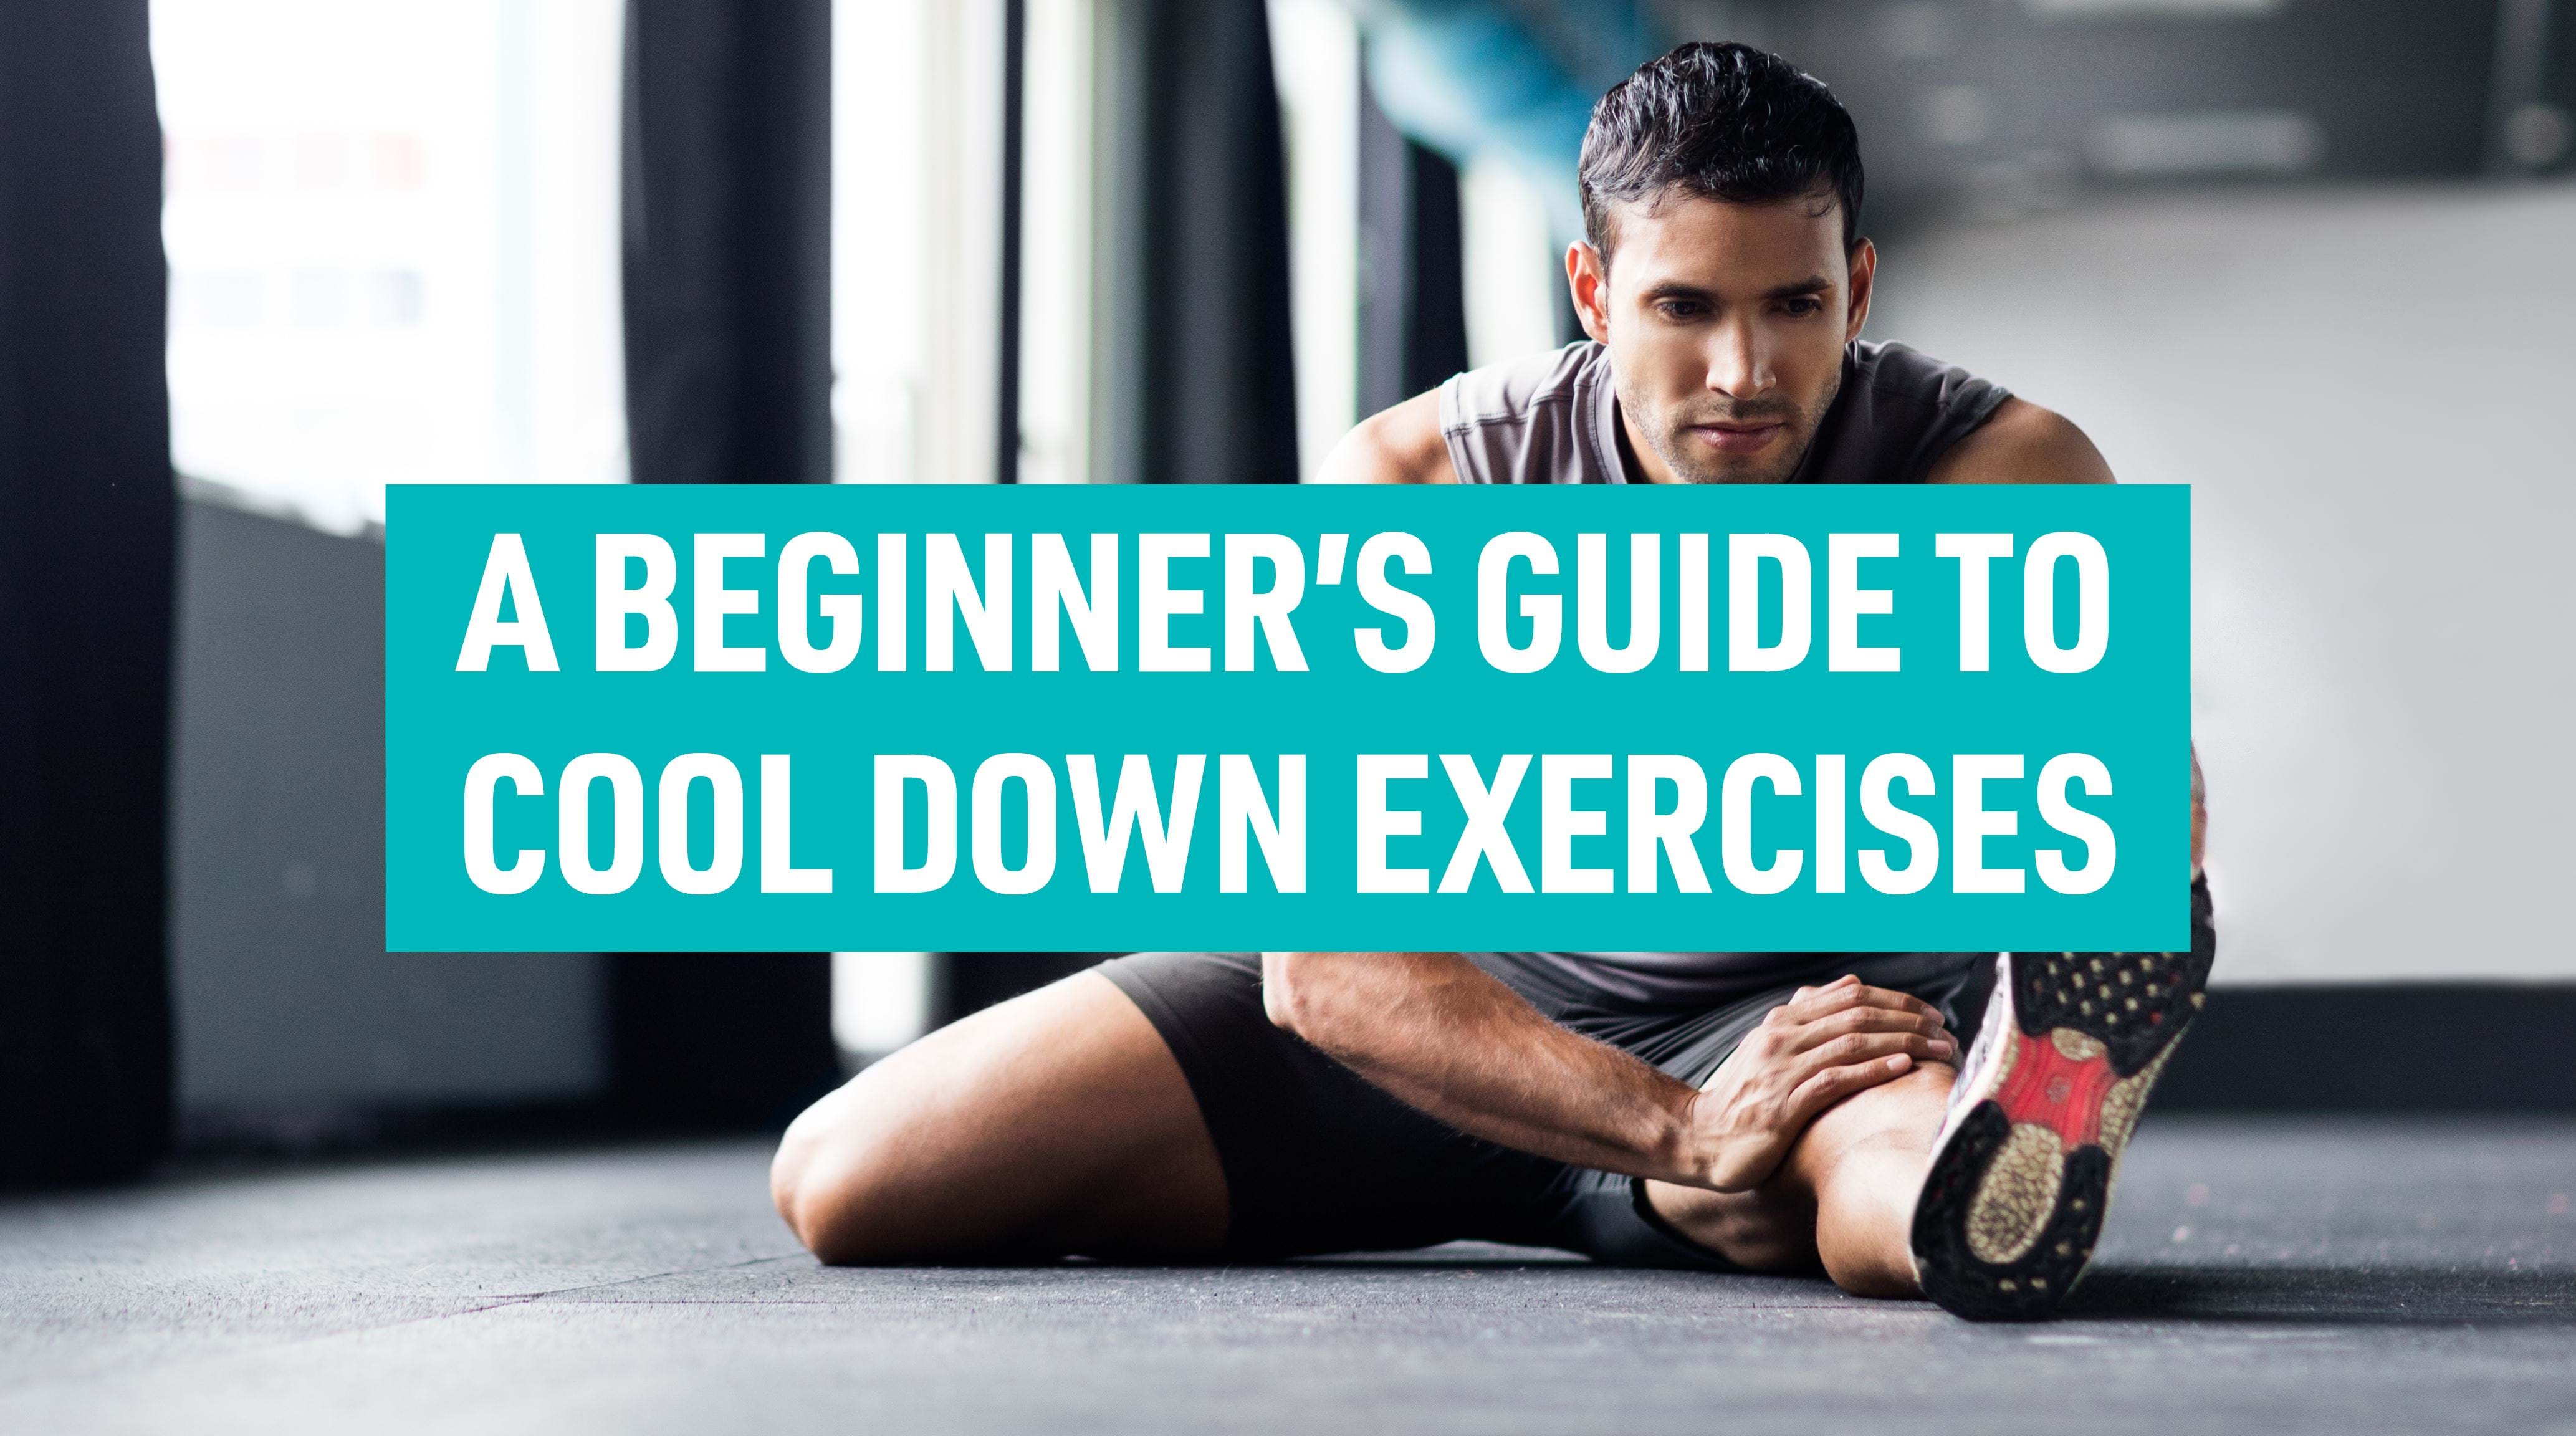 The Beginner's Guide To Cool Down Exercises